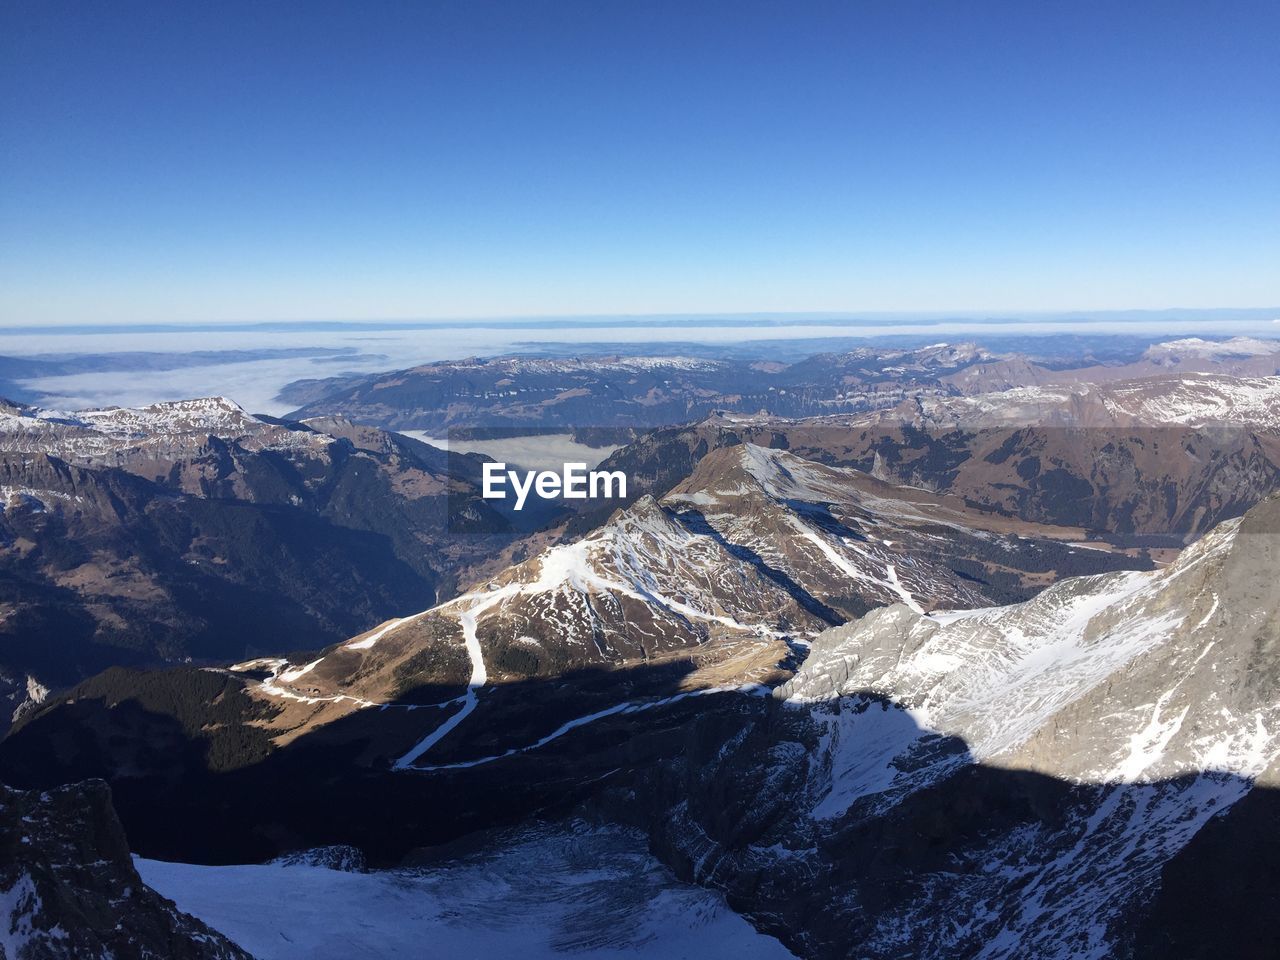 Aerial view of snowcapped mountains against clear blue sky